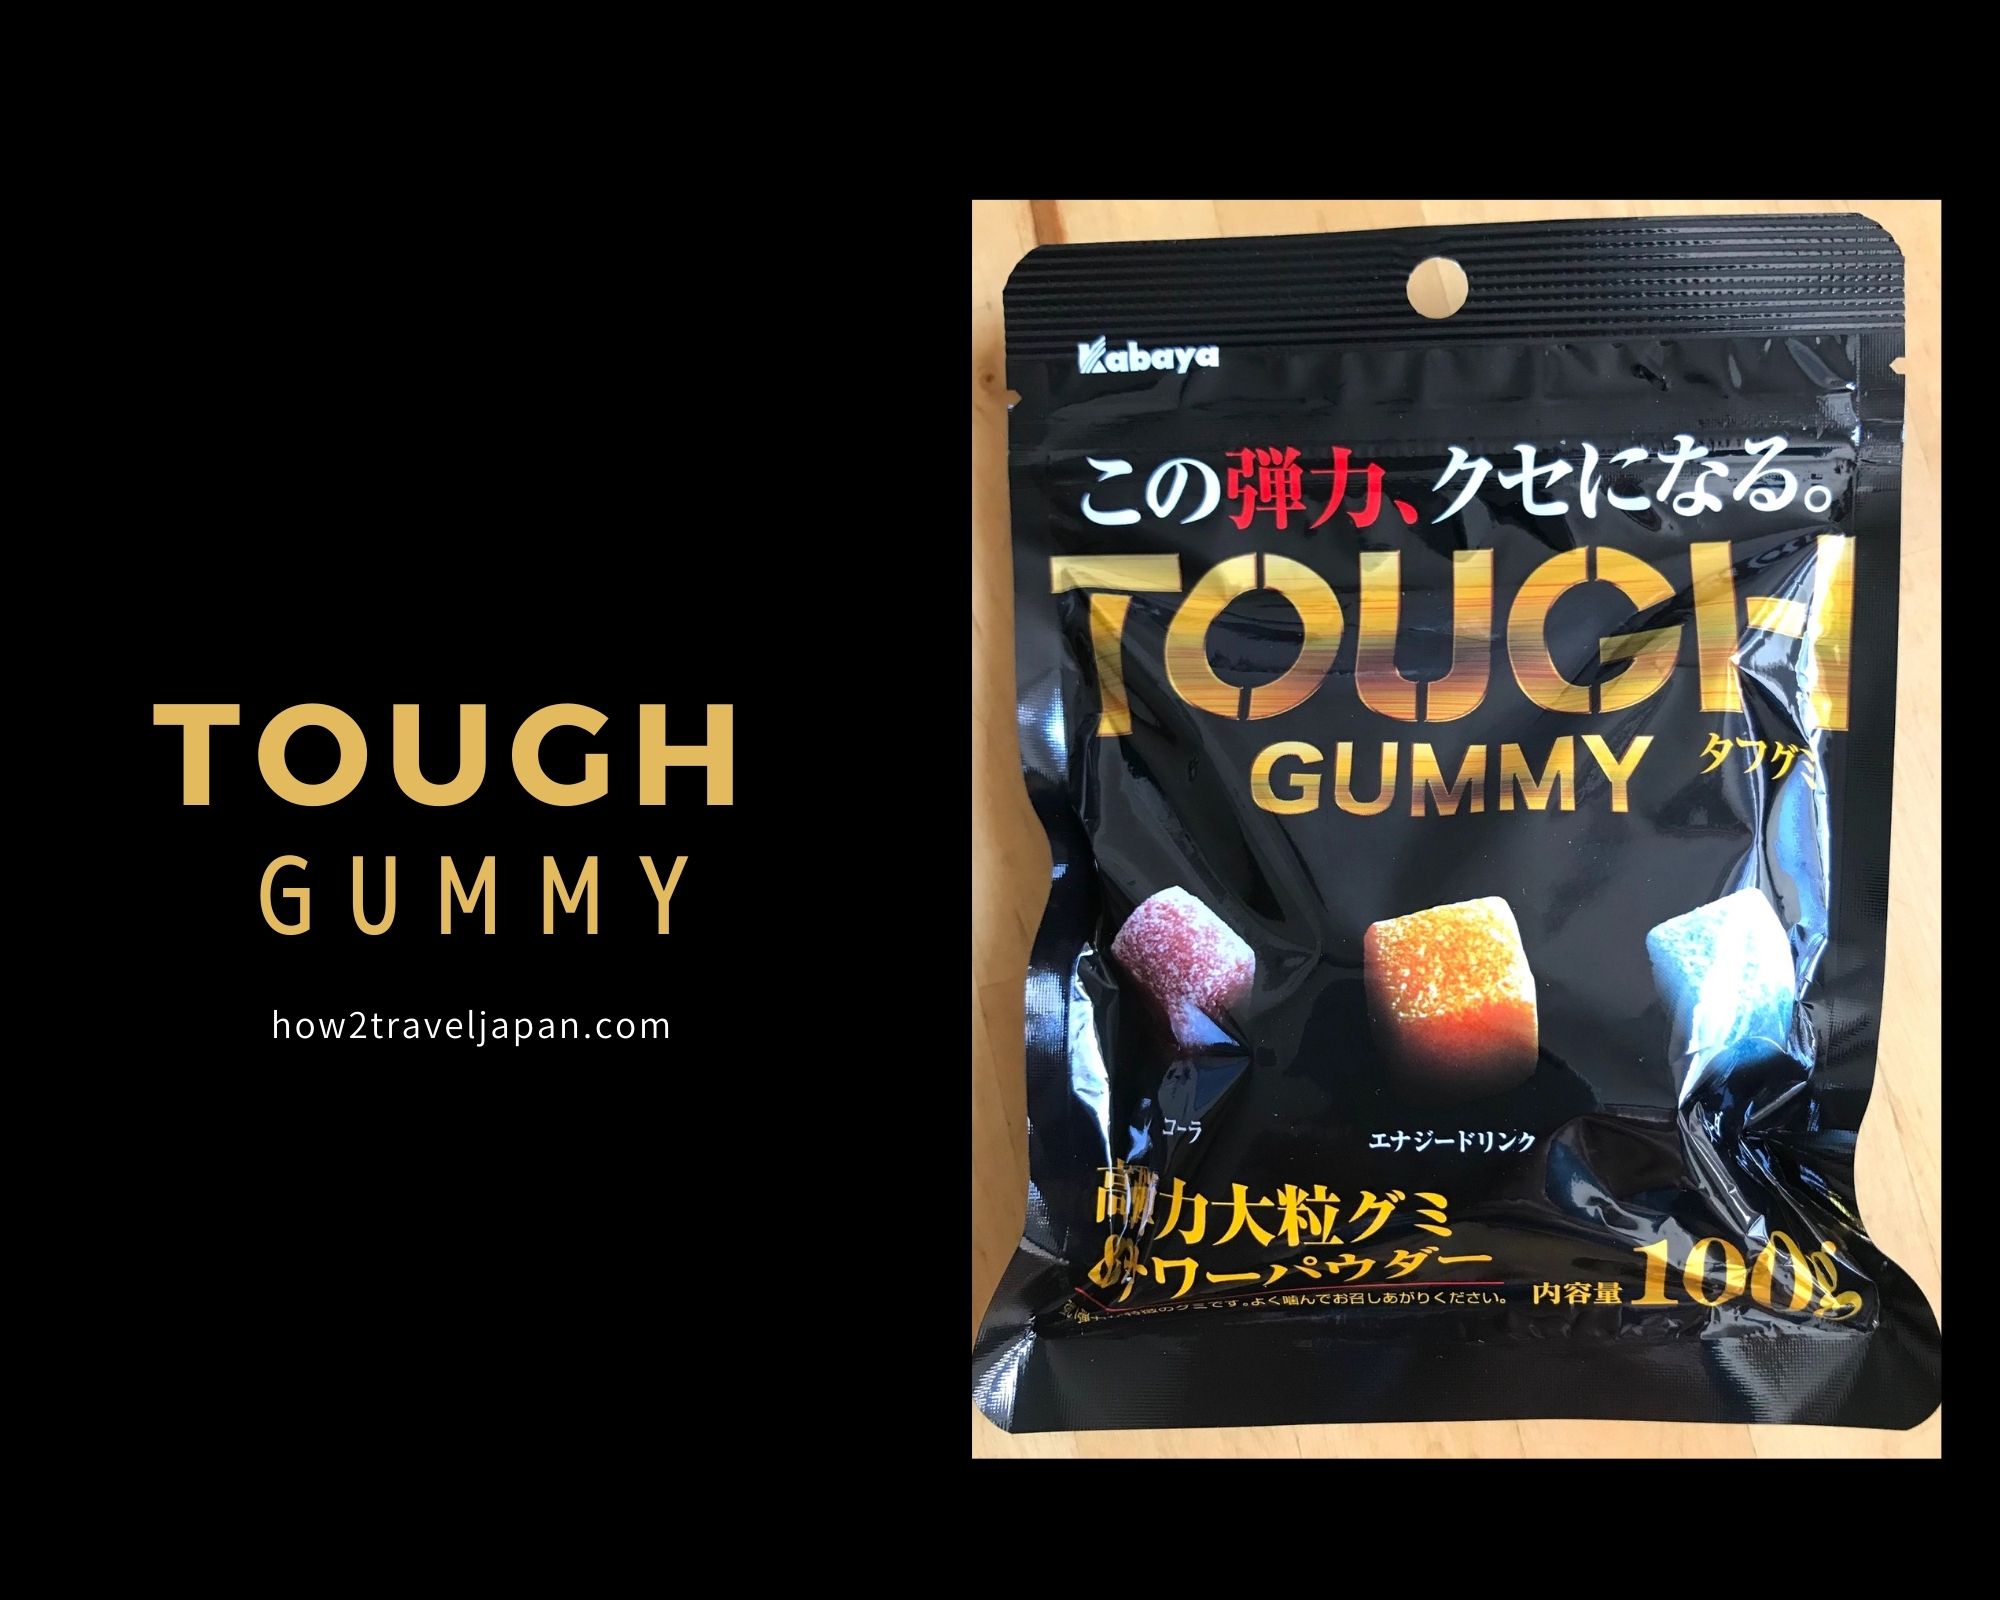 Read more about the article 【tough gummy】 assortment pack from Kabaya